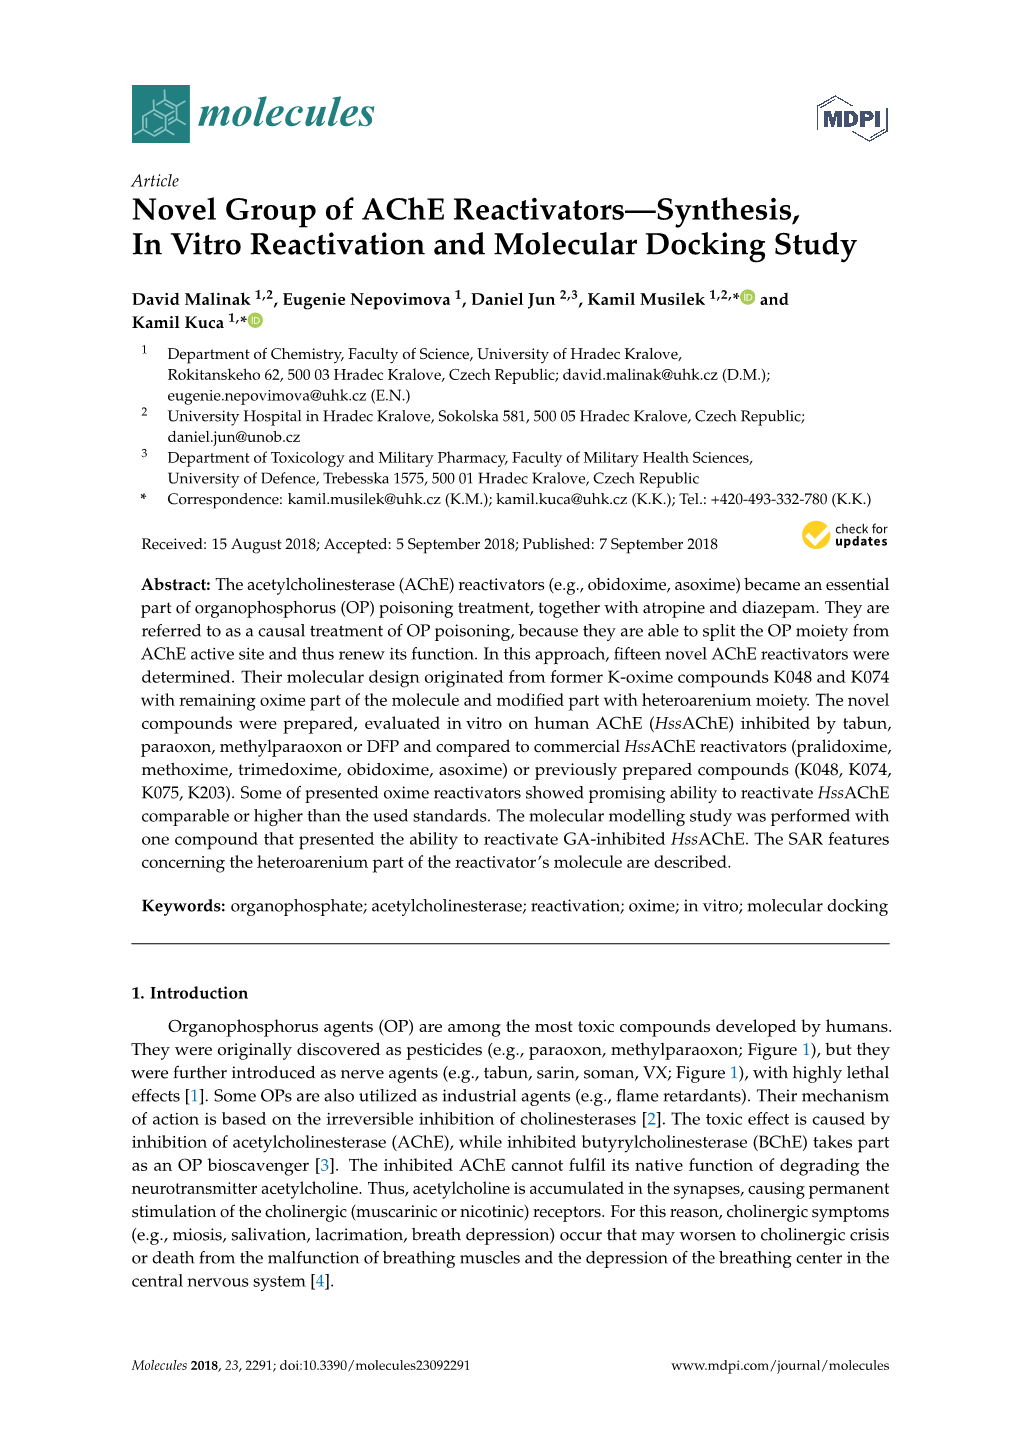 Novel Group of Ache Reactivators—Synthesis, in Vitro Reactivation and Molecular Docking Study